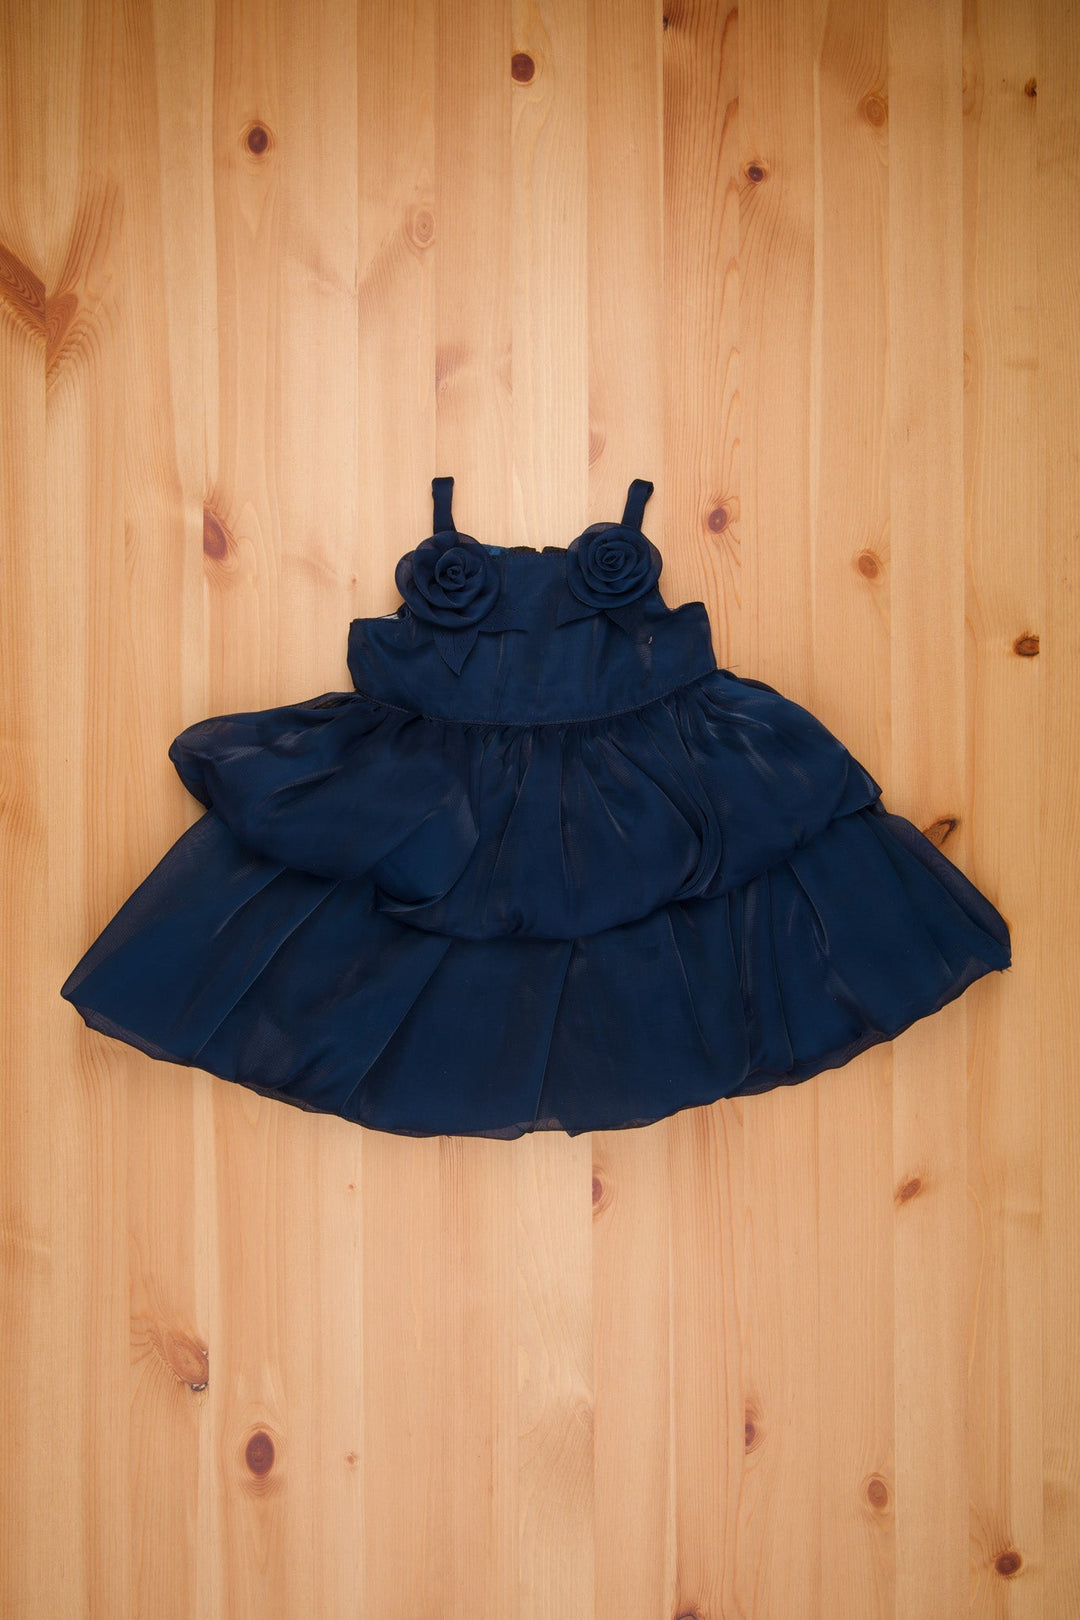 The Nesavu Girls Fancy Party Frock Oceanic Blue Charm Dual-Layered Shimmer Baby Gown - Strap Shoulders & Rose Details - Ultimate Newborn Party Frock Nesavu 14 (6M) / Blue / Organza Tissue PF131H-14 Newborn Birthday Outfit | First Birthday Frock Girl | The Nesavu